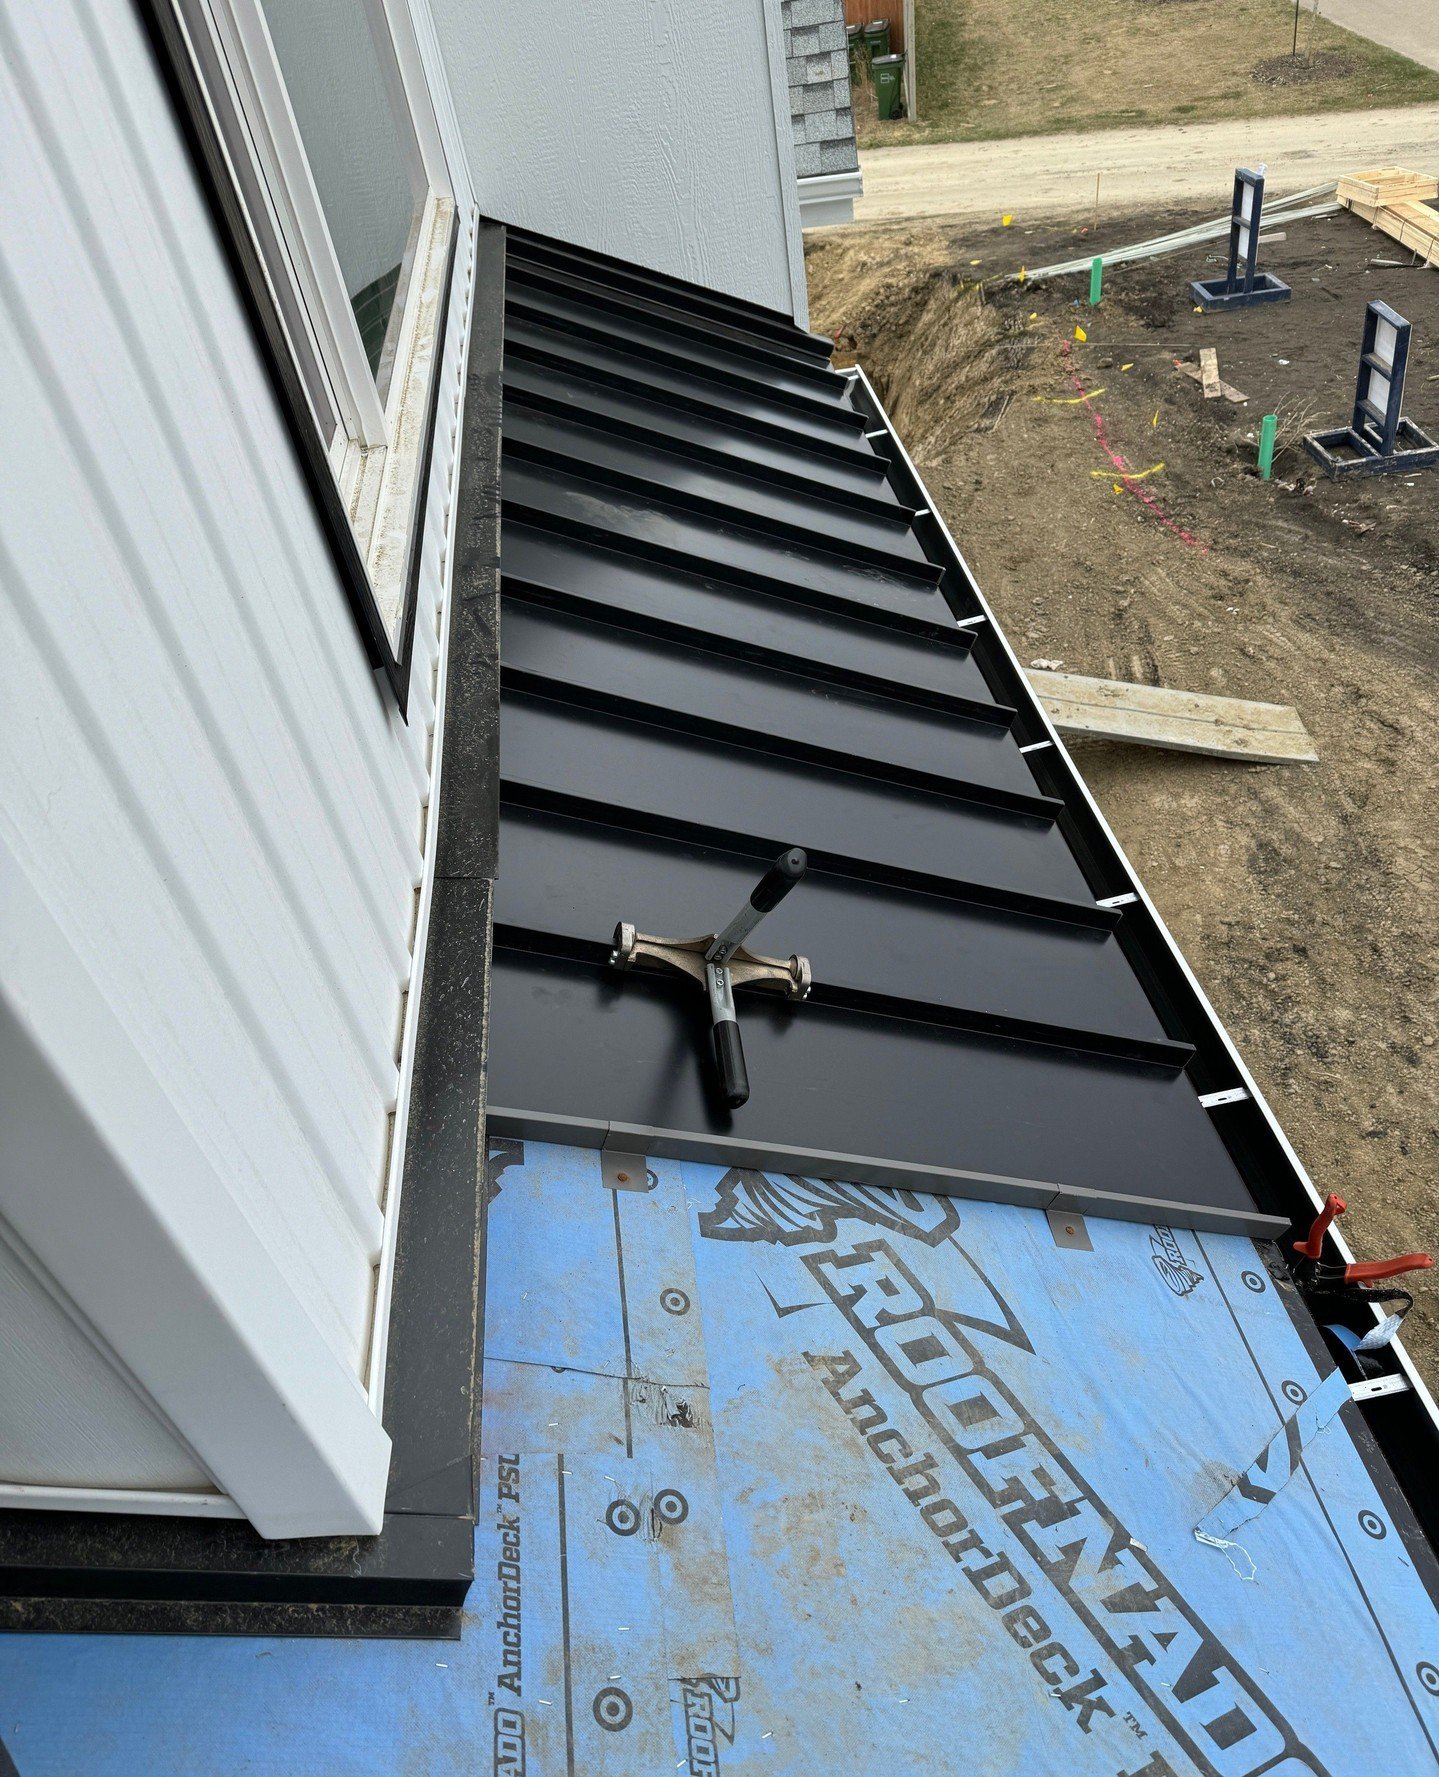 Why we LOVE metal panels:⁠
⁠
✅ More durable⁠
✅ Energy efficient⁠
✅ Sustainable⁠
⁠
Want to know if metal panels are right for you? 2 The Top founder, Brandon will walk you through the process, answer all your questions, and help you choose what roofin